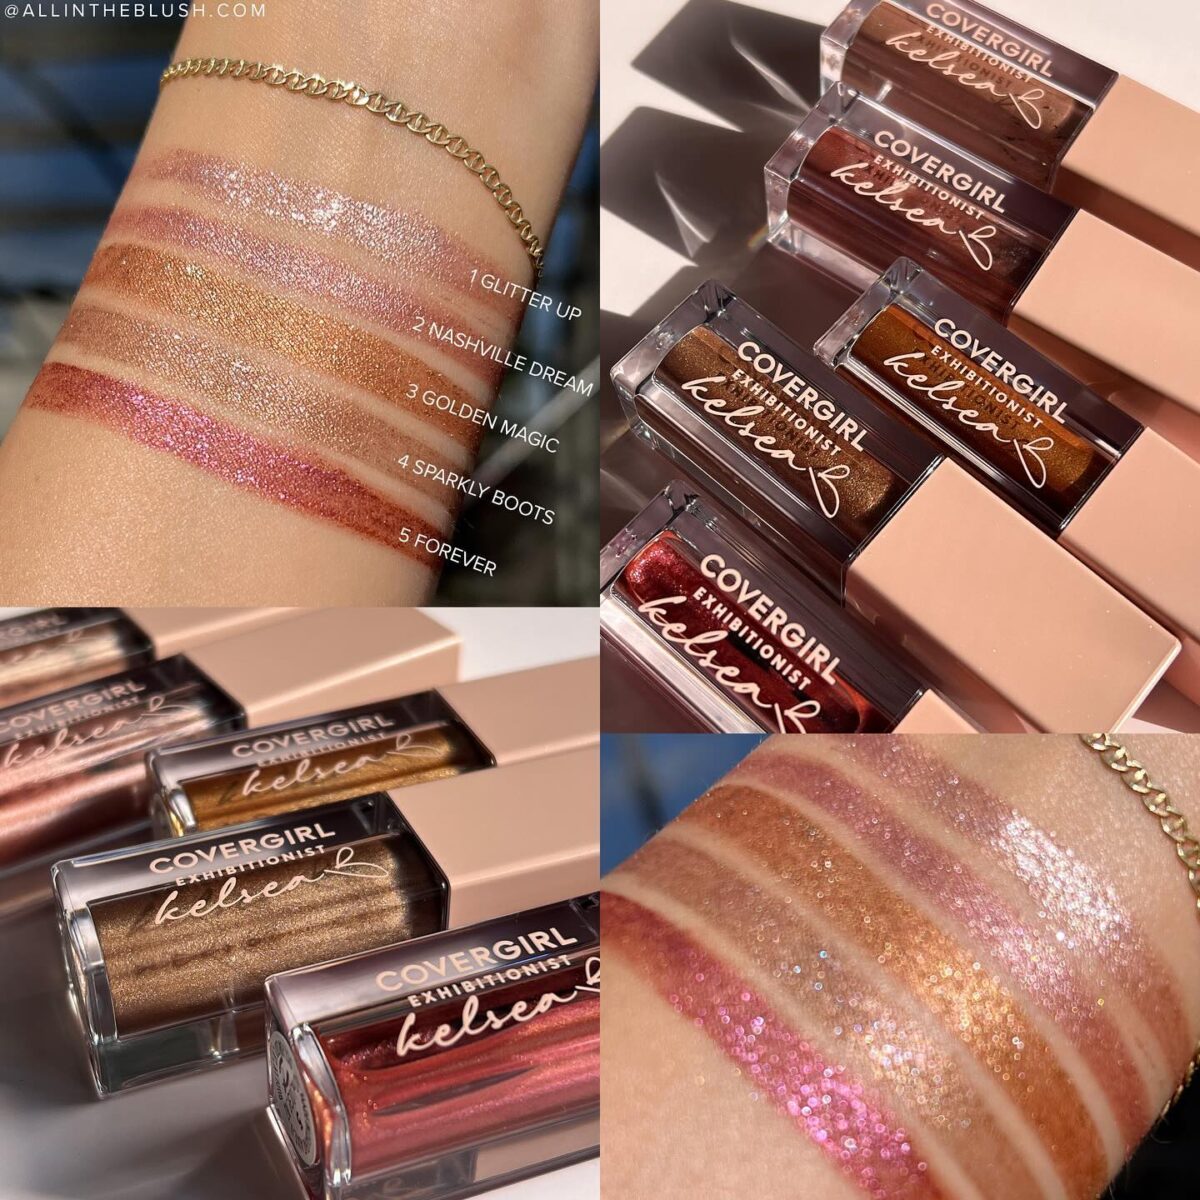 Covergirl Exhibitionist by Kelsea Ballerini Liquid Glitter Eyeshadow Review & Swatches!